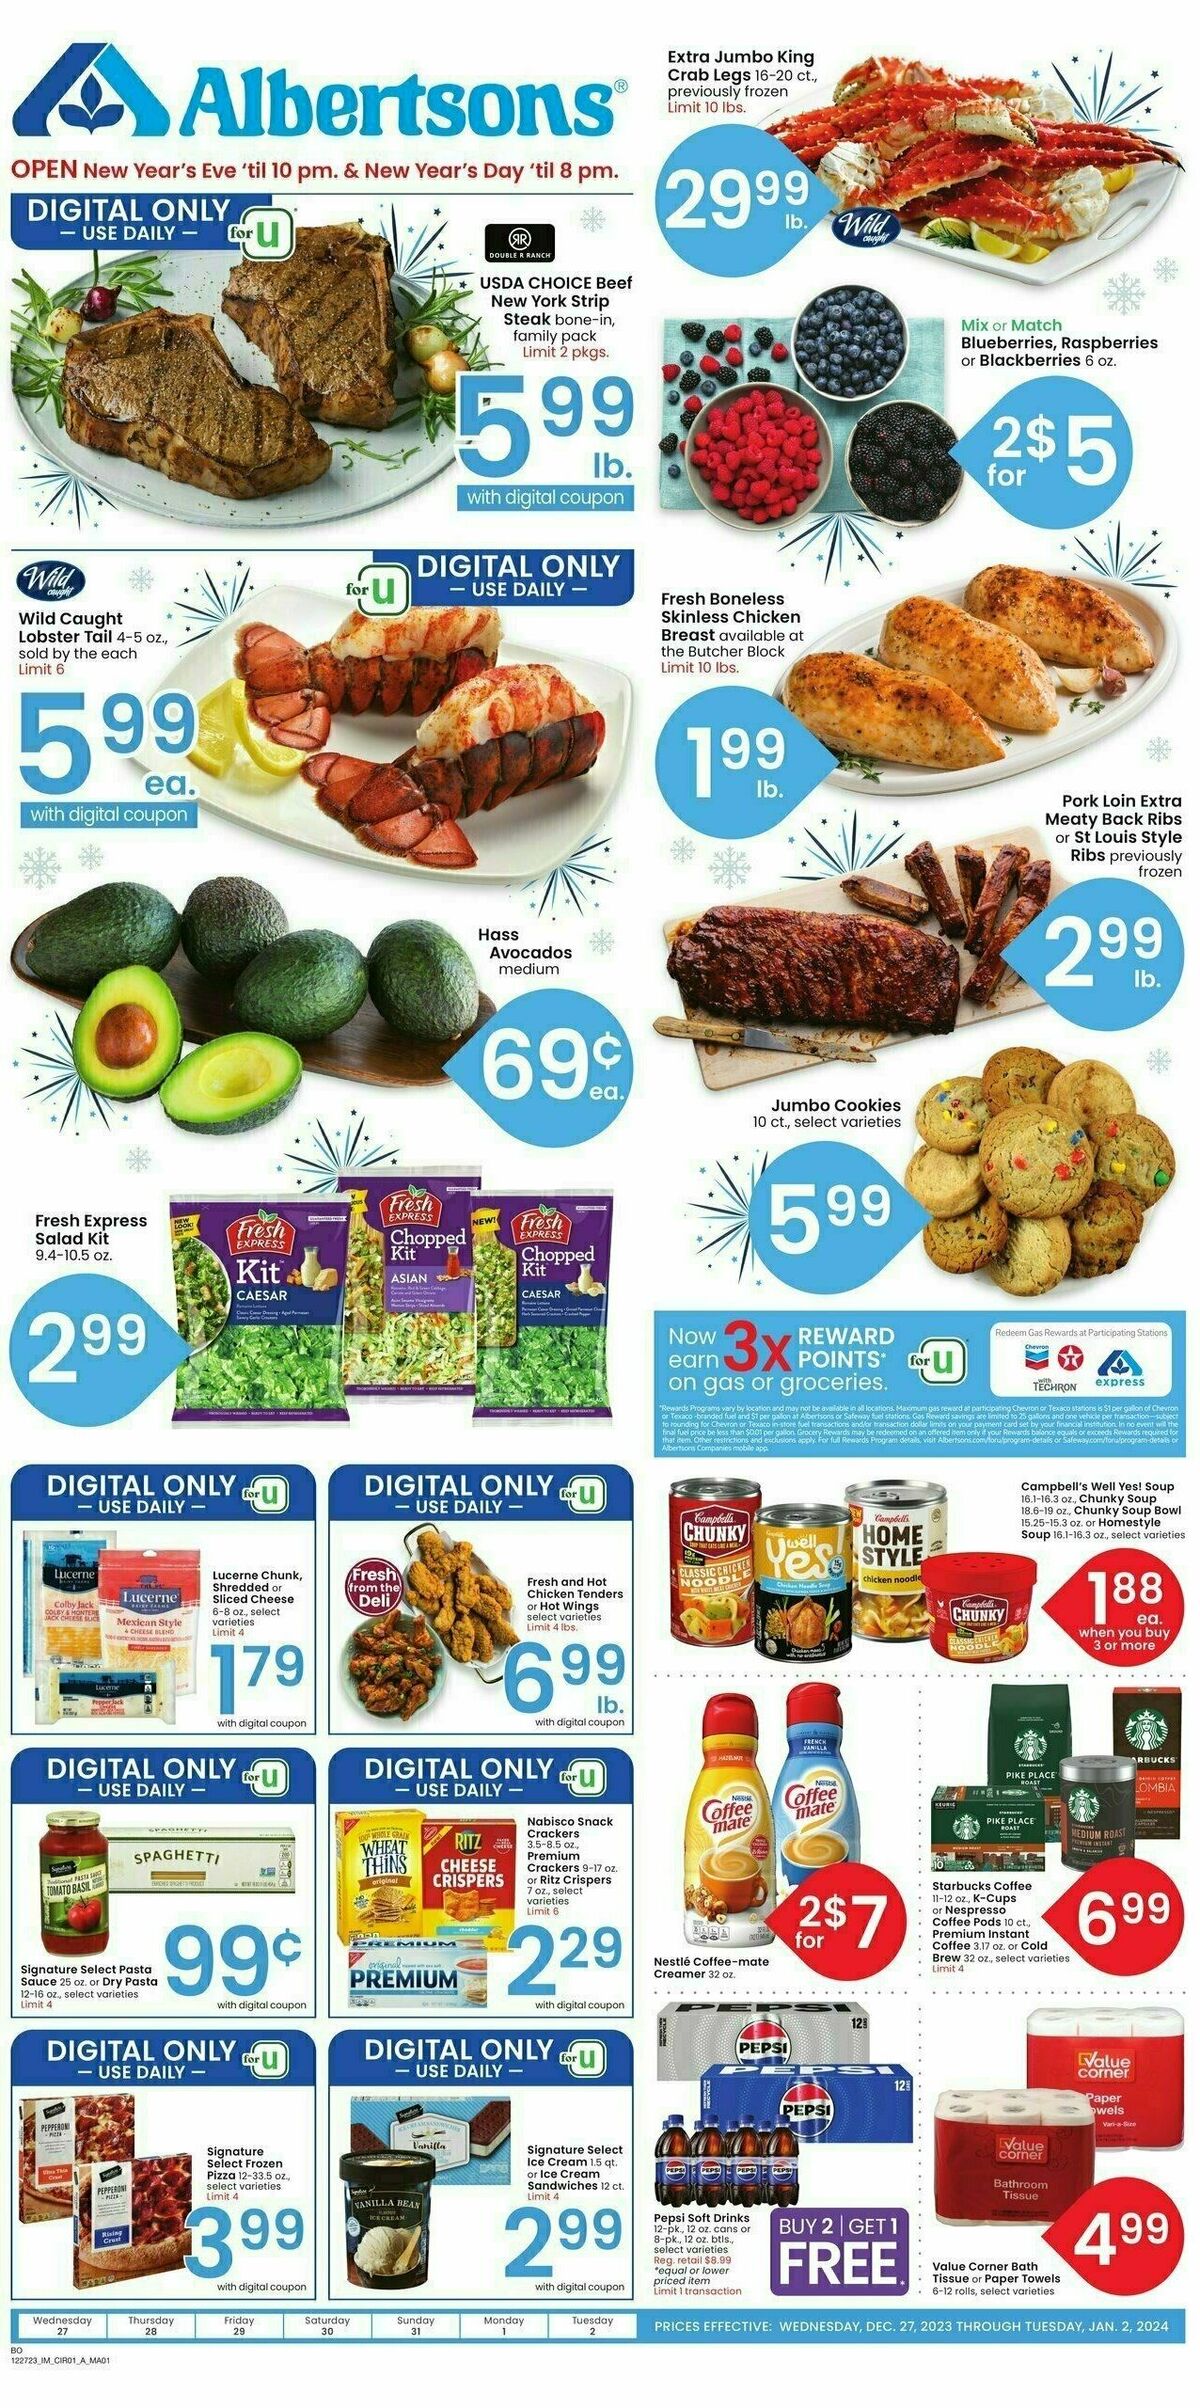 Albertsons Weekly Ad from December 27